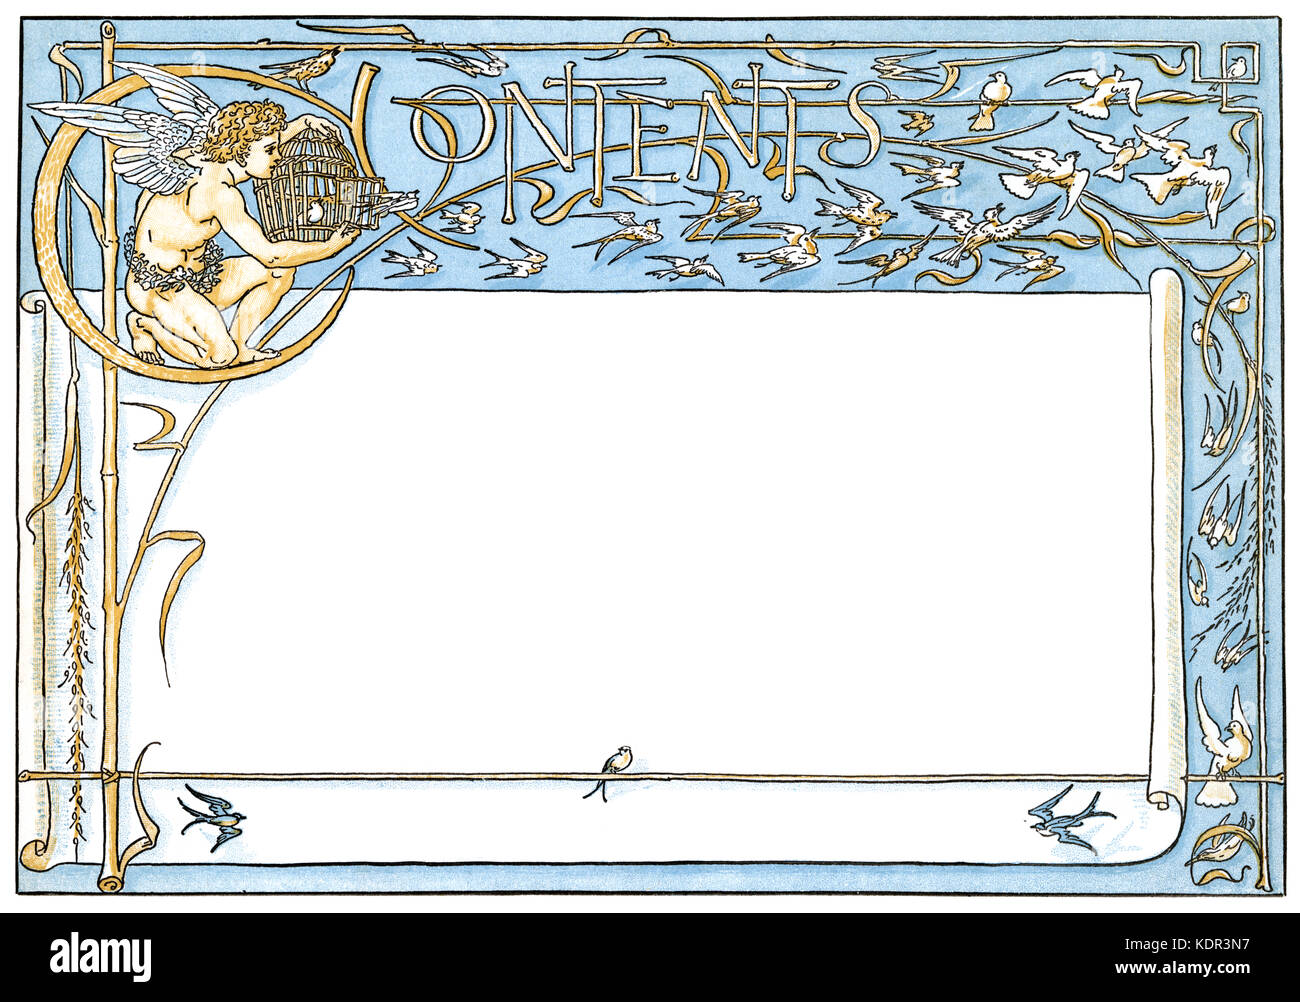 Walter Crane border for Contents page with naked boy angel holding open birdcage and songbirds flying free. Stock Photo